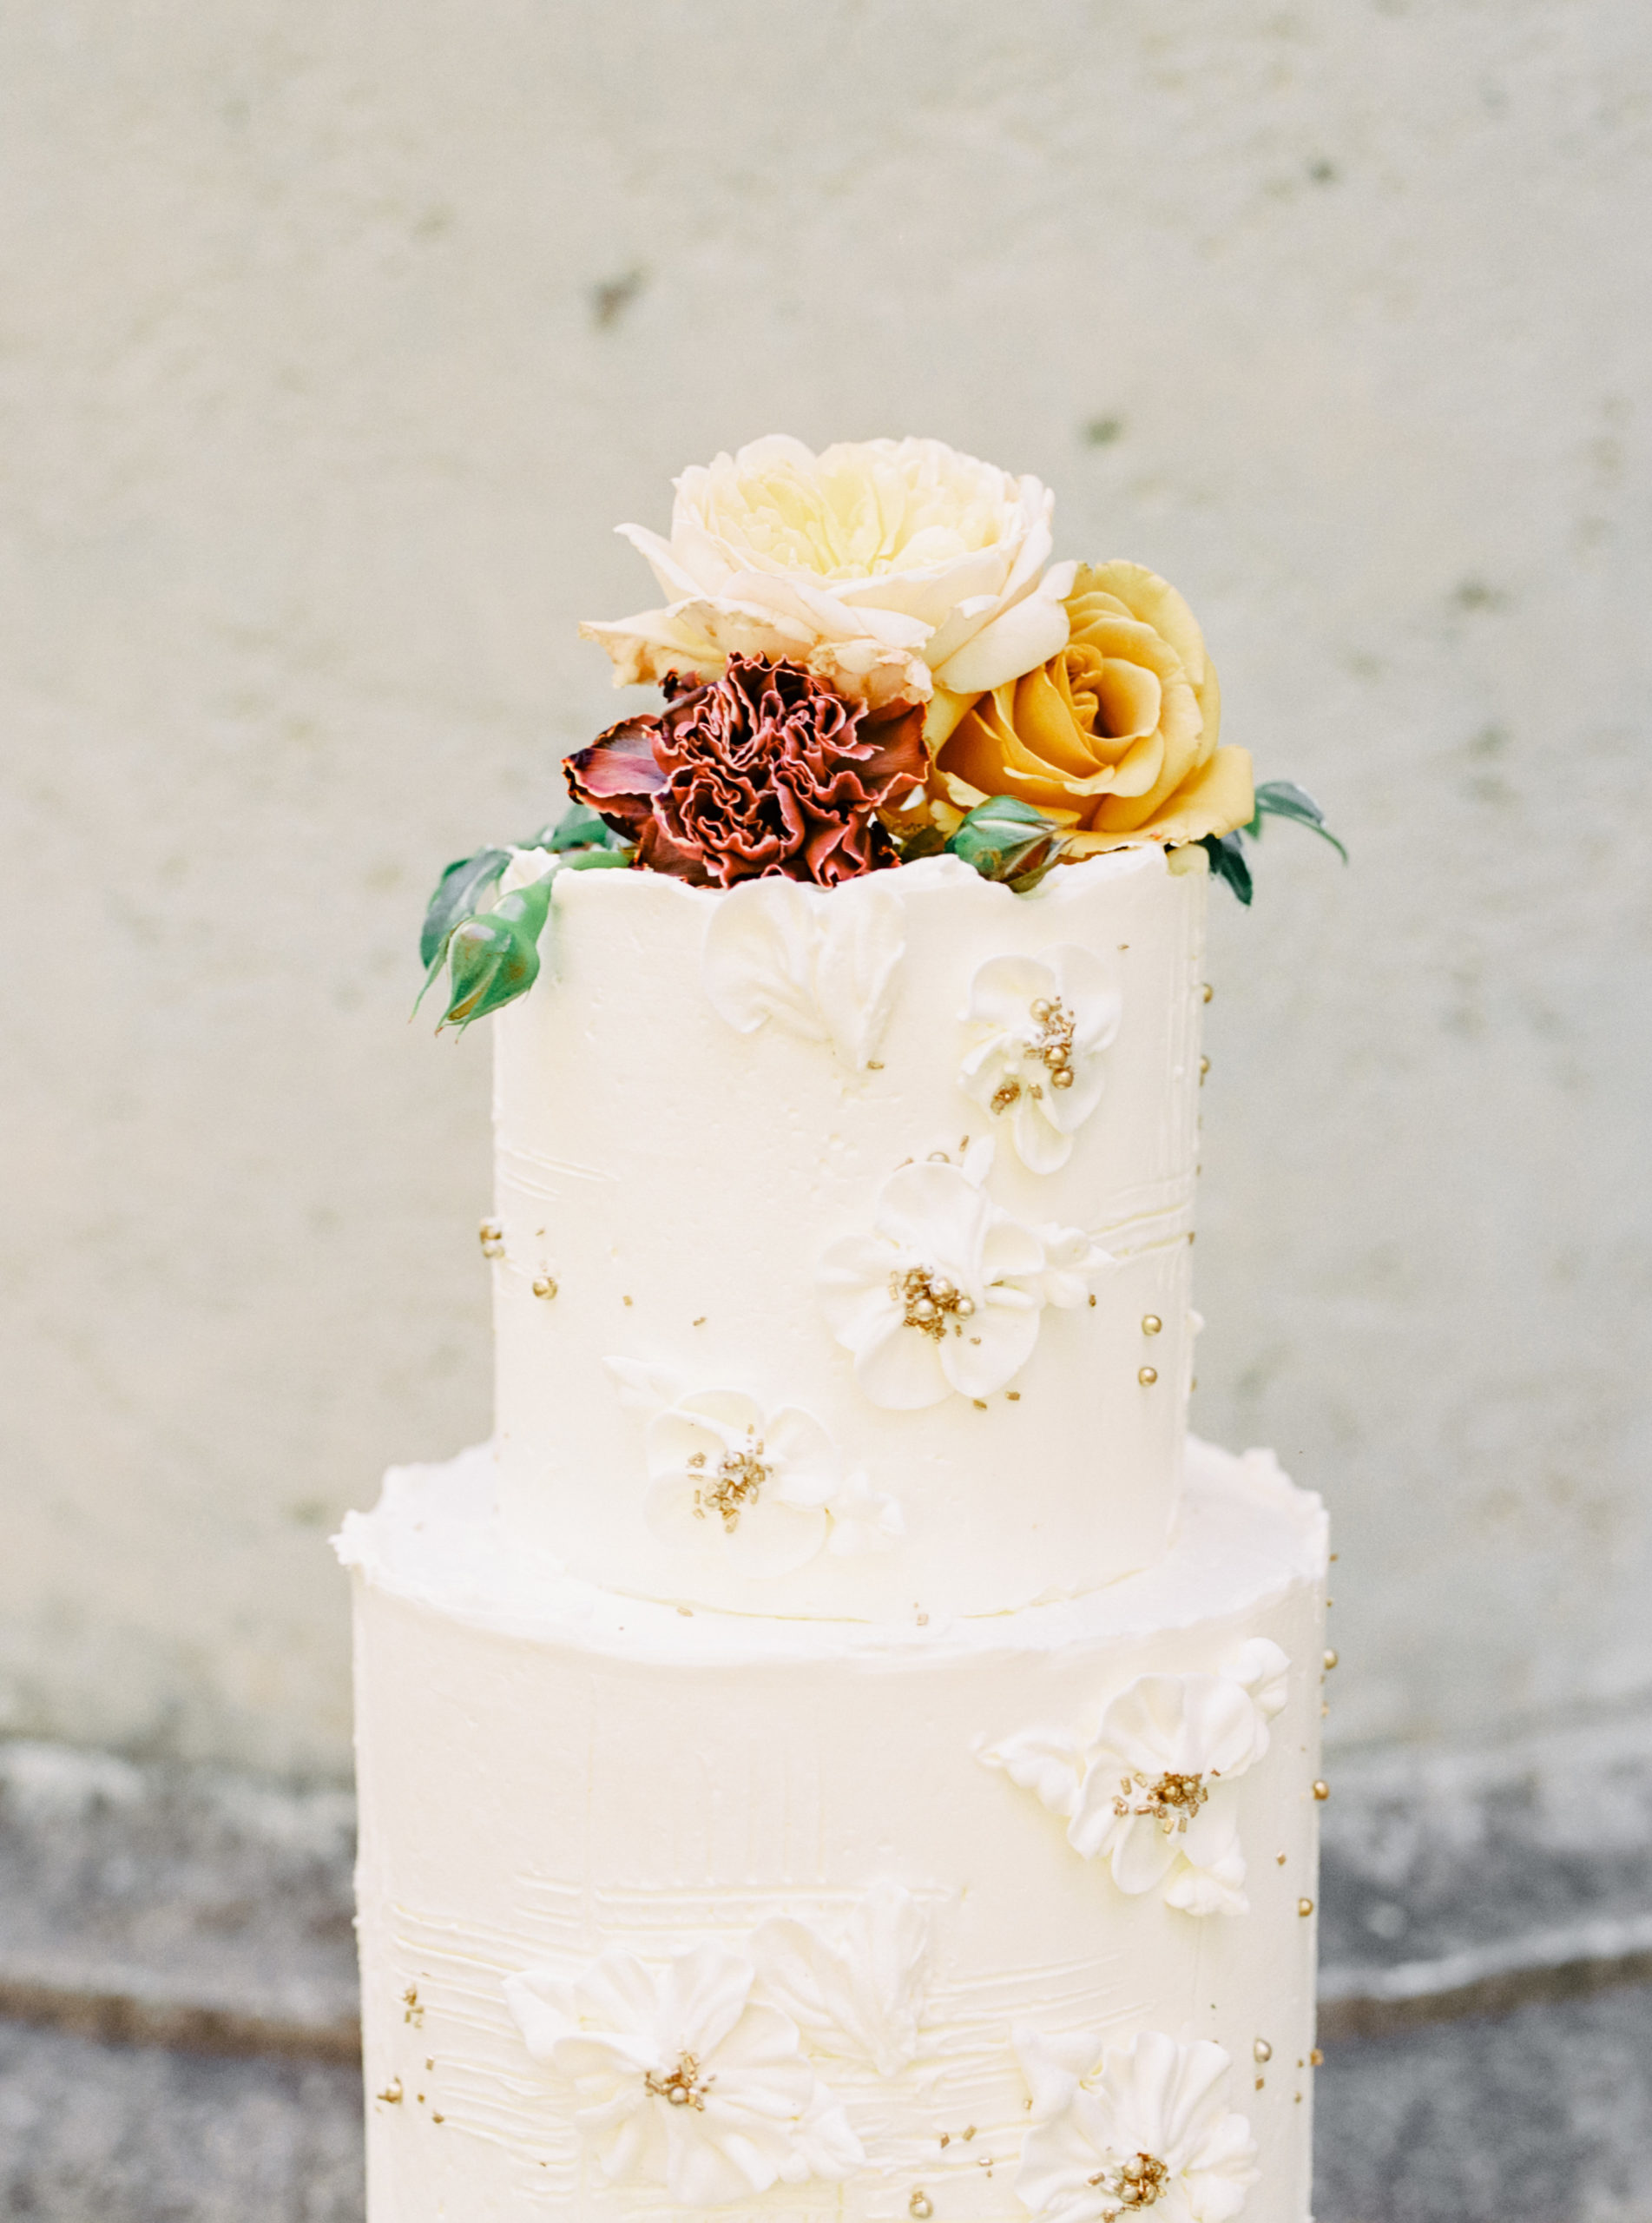 Wedding cake topped with flowers and decorated with white, buttercream flowers and gold accents